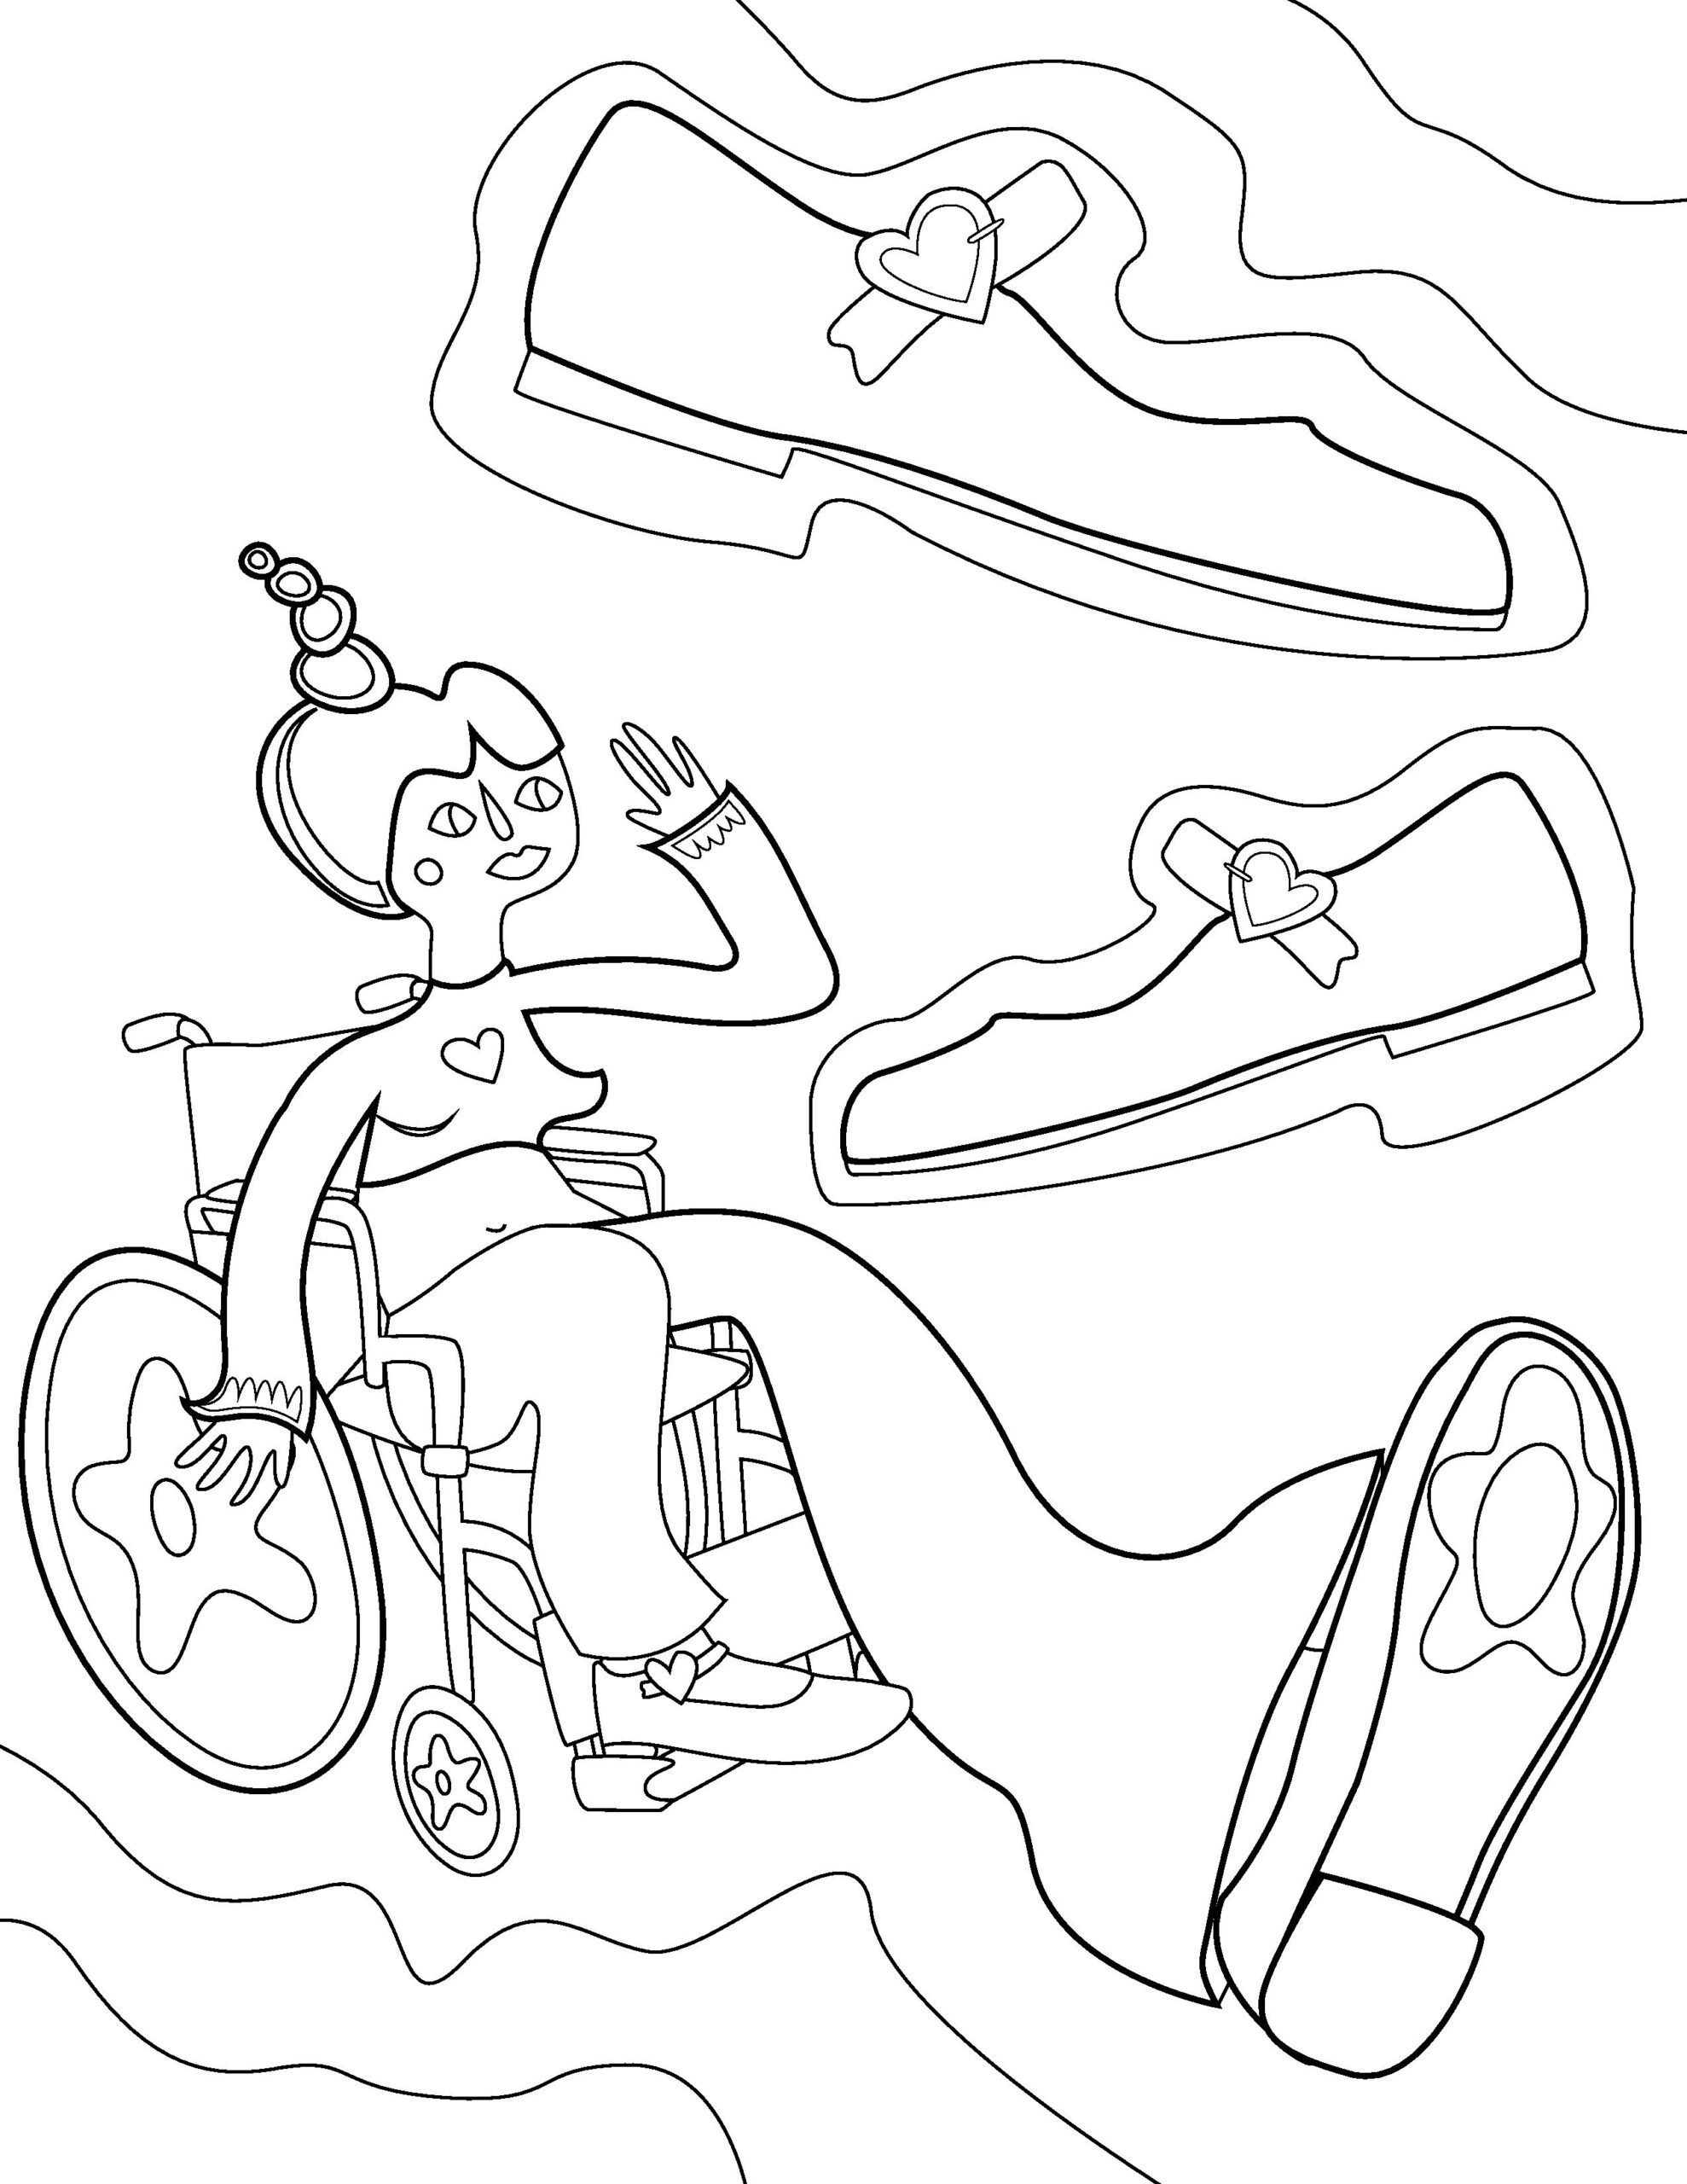 Colouring page illustration of a figure in a wheelchair with leg extended, accompanied by illustrations of shoes.